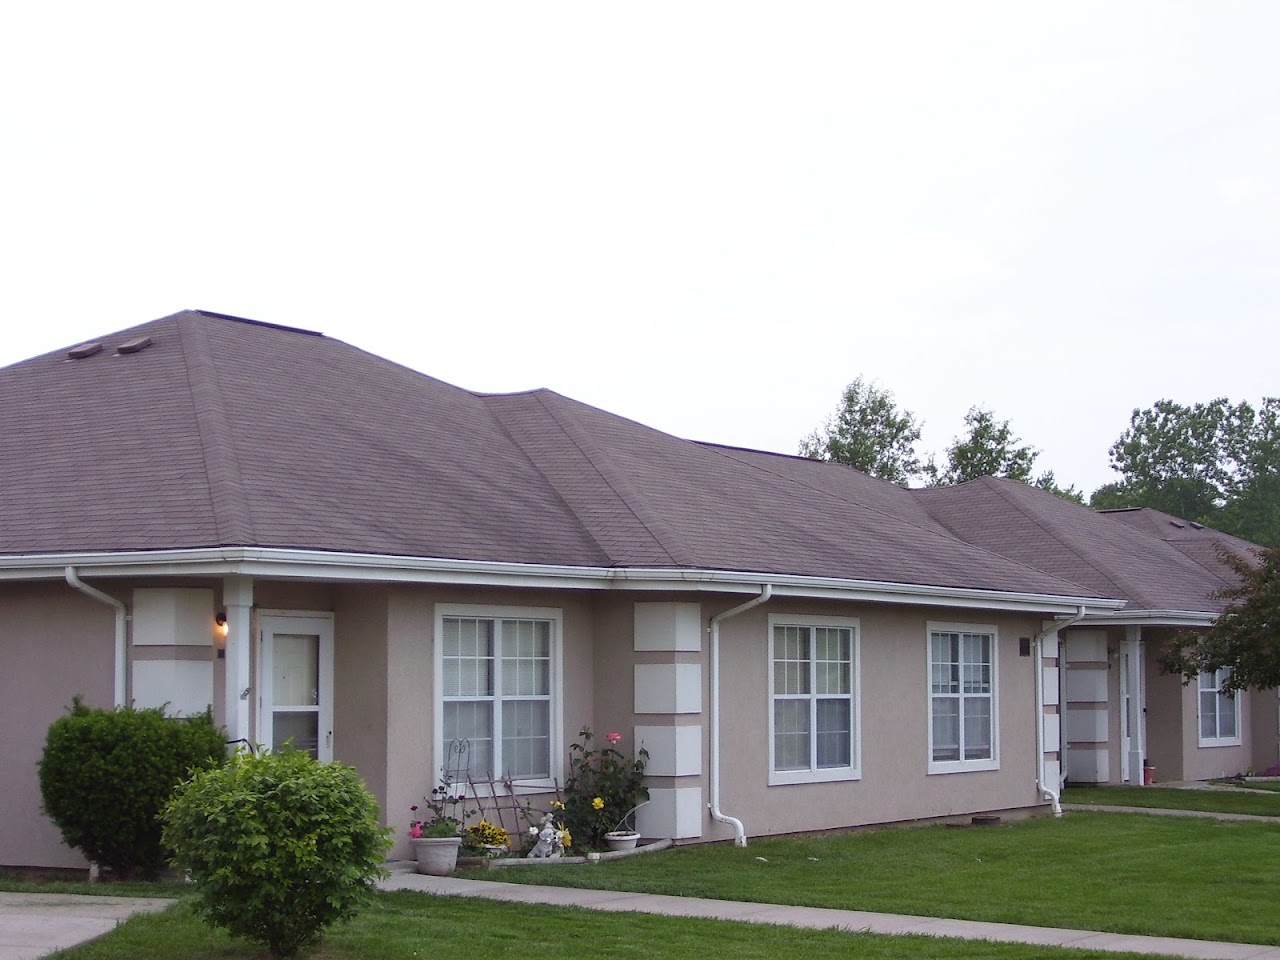 Photo of WESTCHESTER VILLAGE OF OAK. Affordable housing located at 408 SE SEVENTH ST OAK GROVE, MO 64075